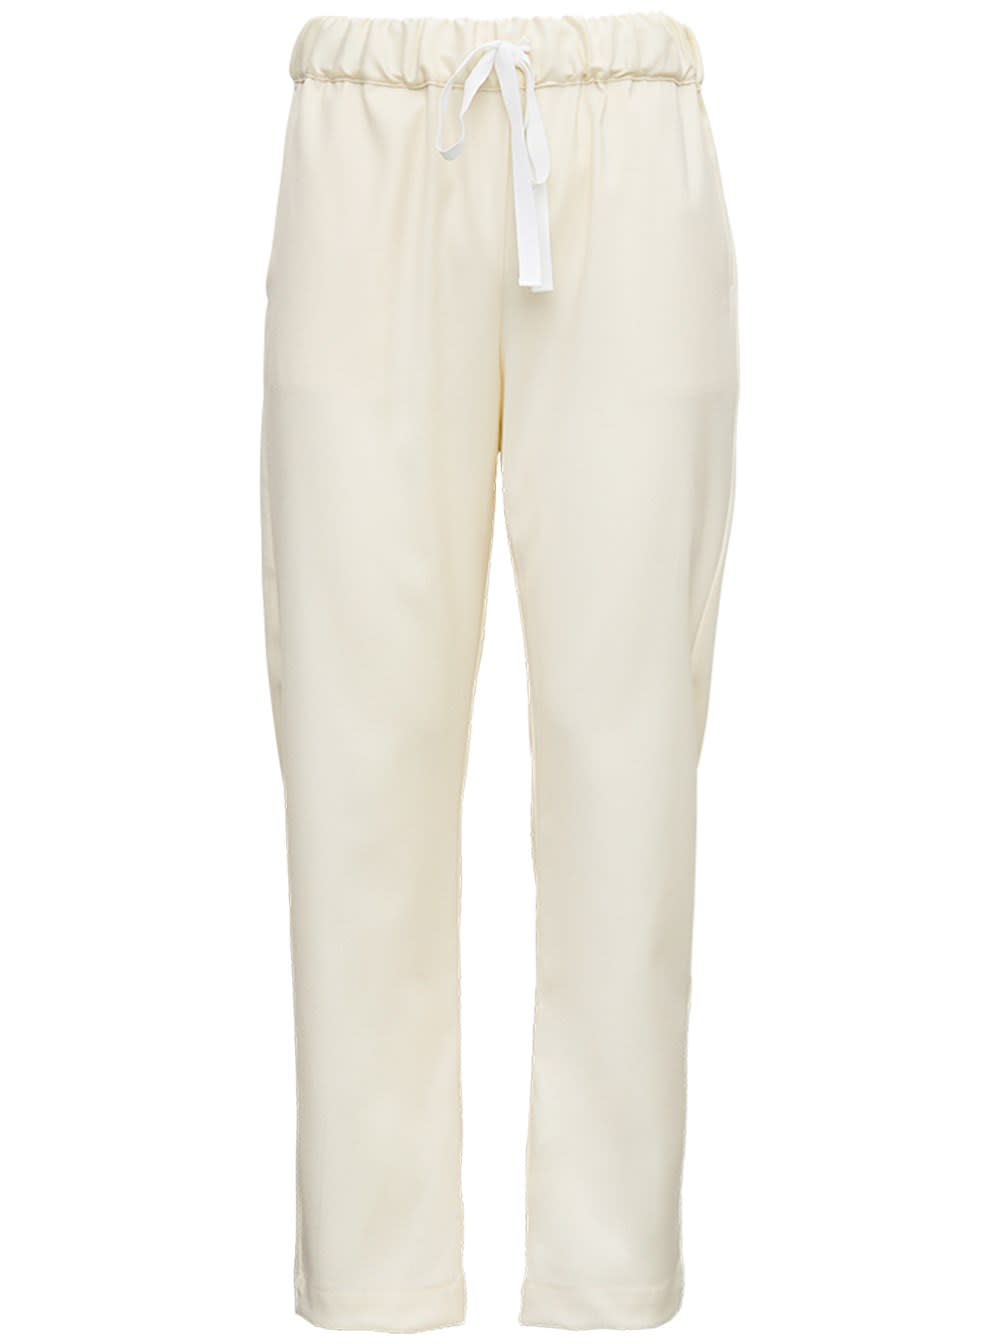 SEMICOUTURE Buddy Pants In Cream-colored Wool Blend